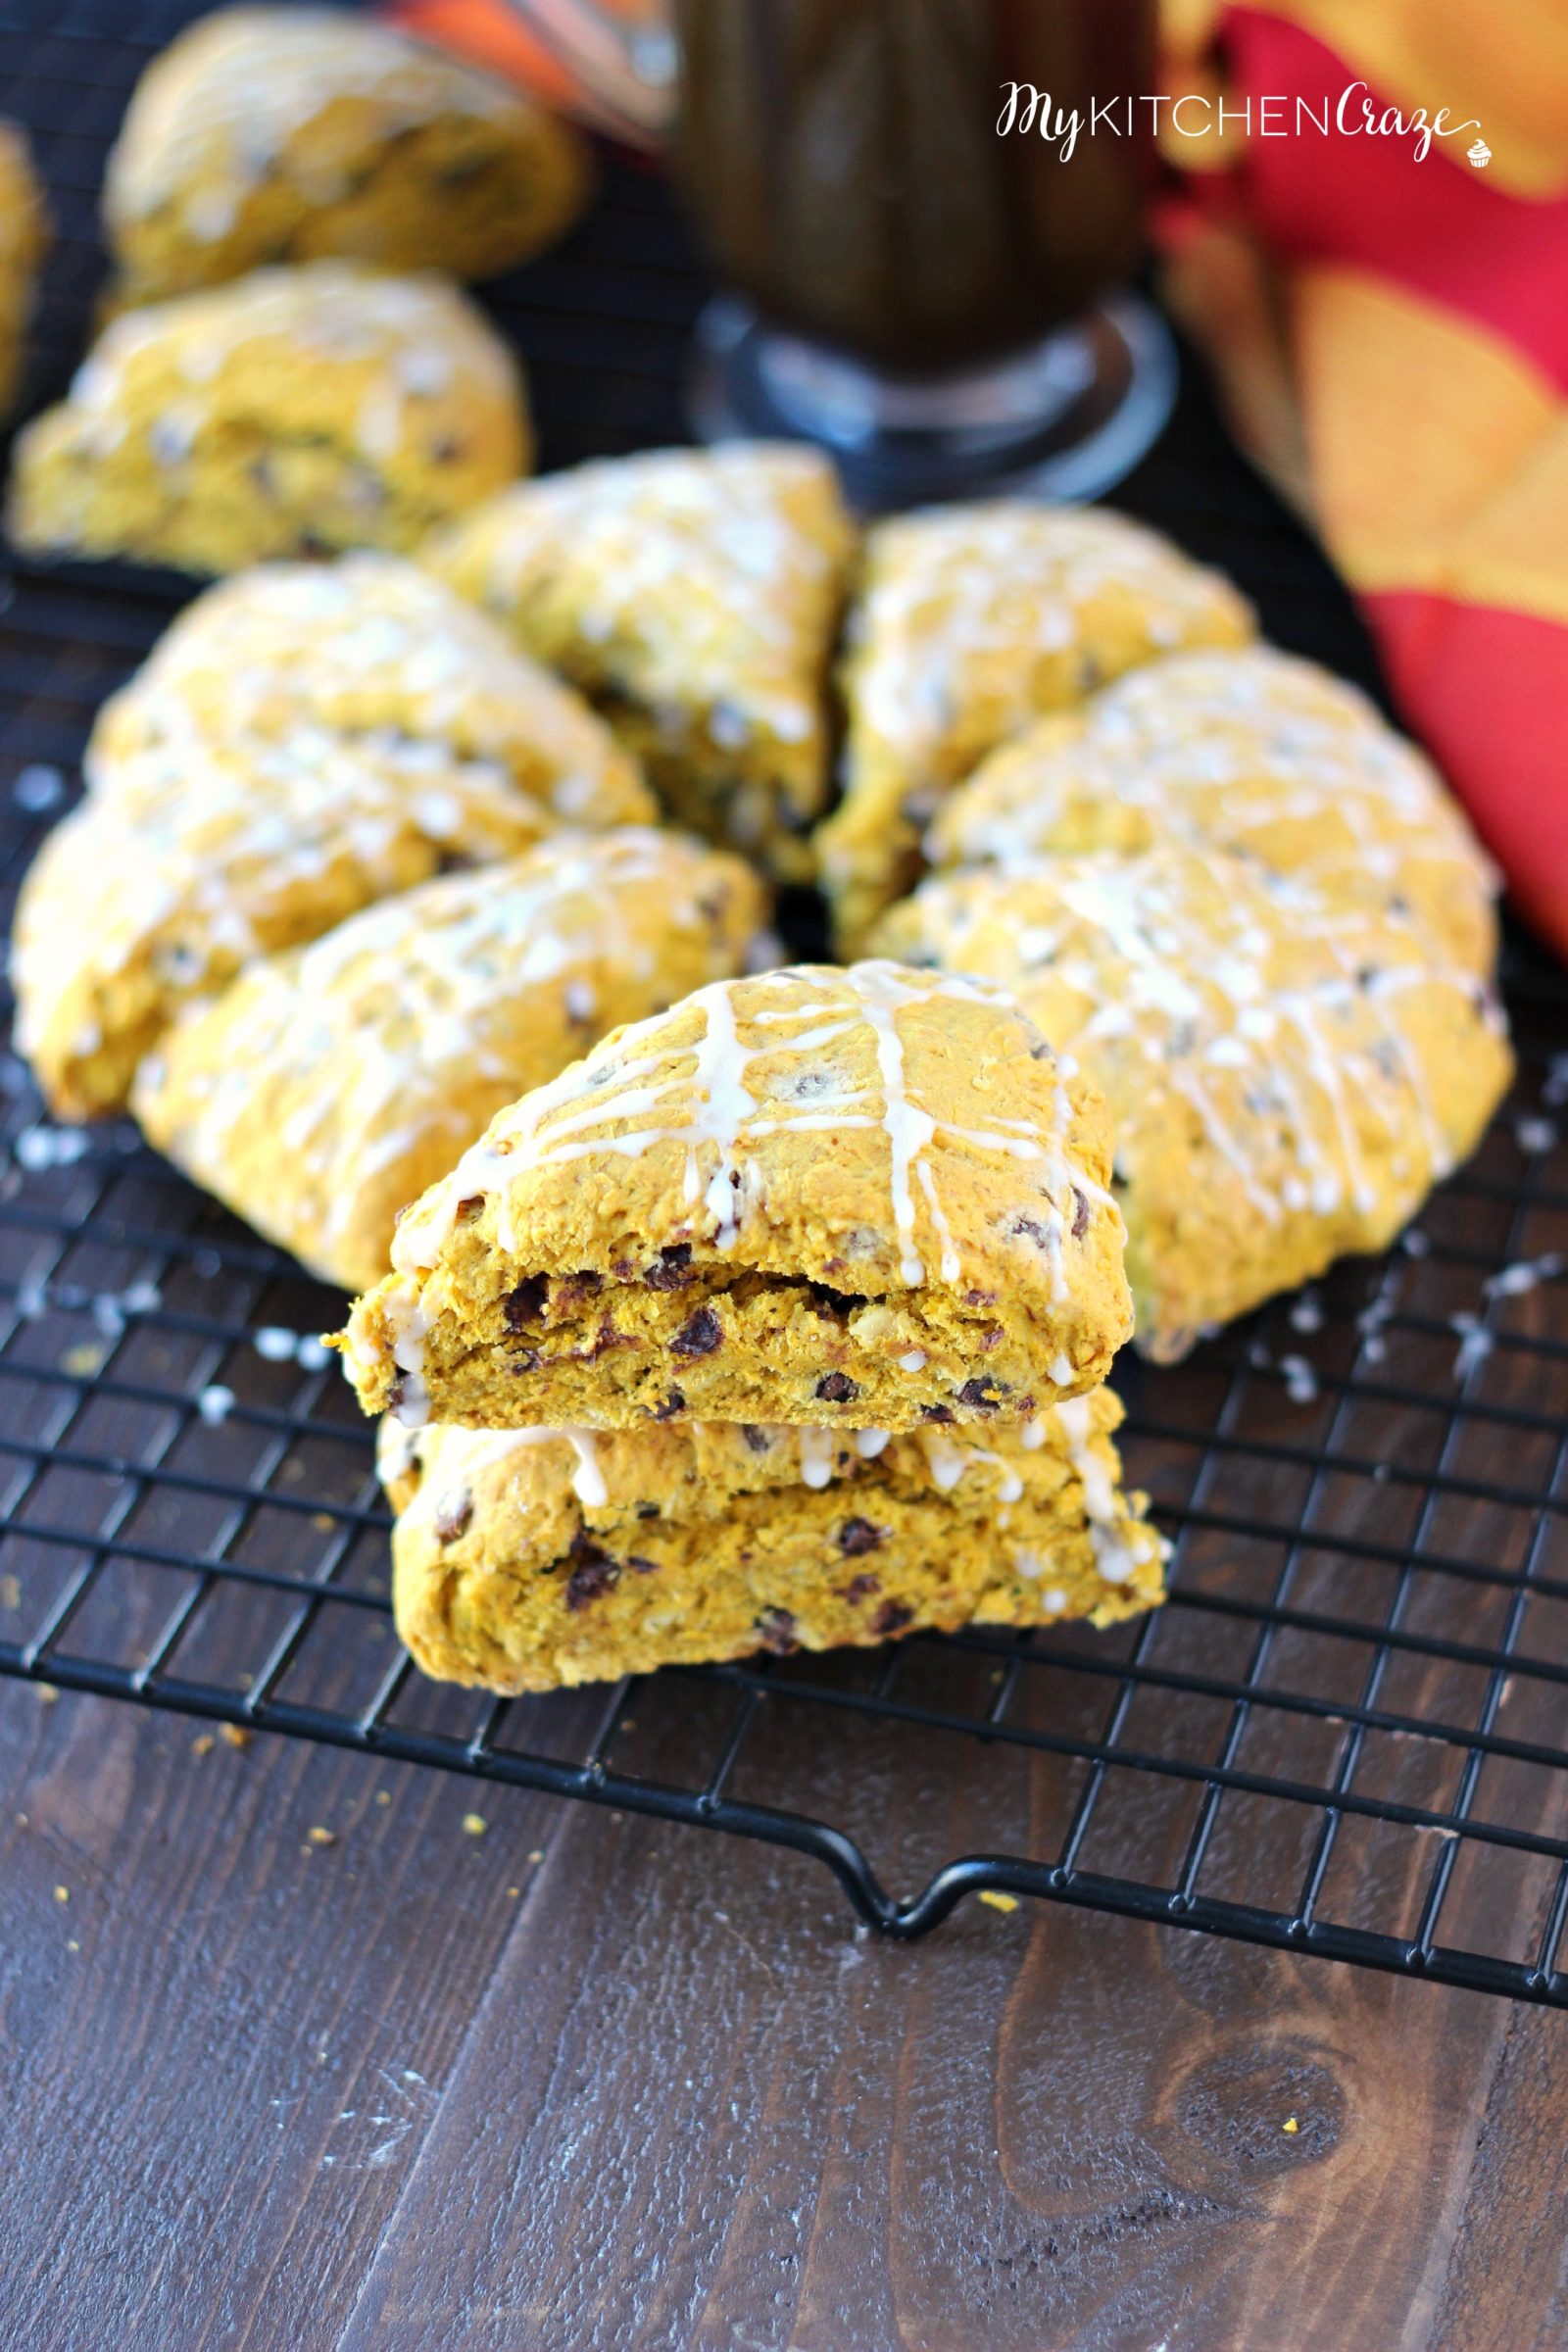 Pumpkin Oatmeal Chocolate Chip Scones ~ mykitchencraze.com ~ A perfect fall treat to go with your morning coffee/tea!